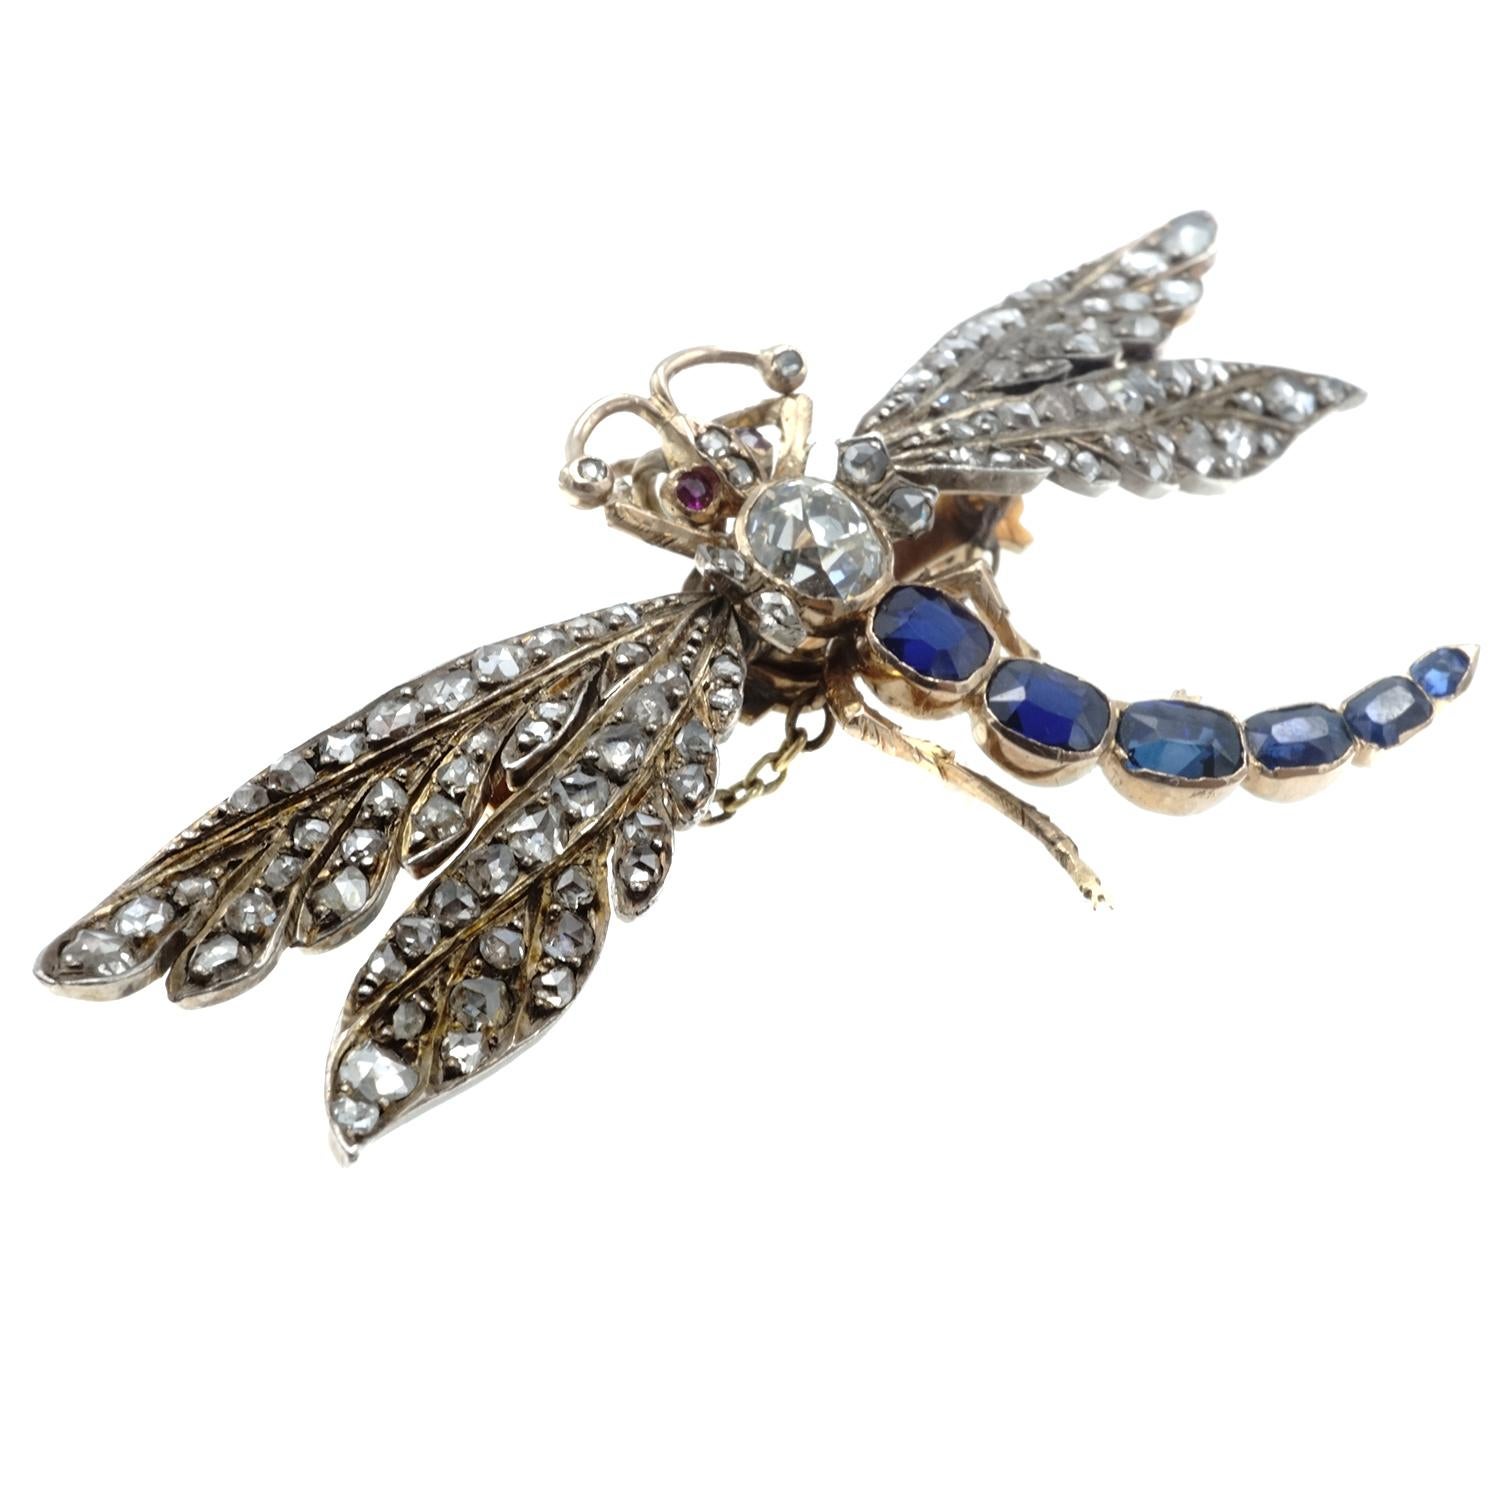 The dragonfly is crafted in 14 karat rose gold and silver featuring an old european cut diamond on the body and rose cut diamonds on moveable wings mounted on springs.  The tail is enhanced with 6 sapphires and the eyes are set with rubies.  Weighs